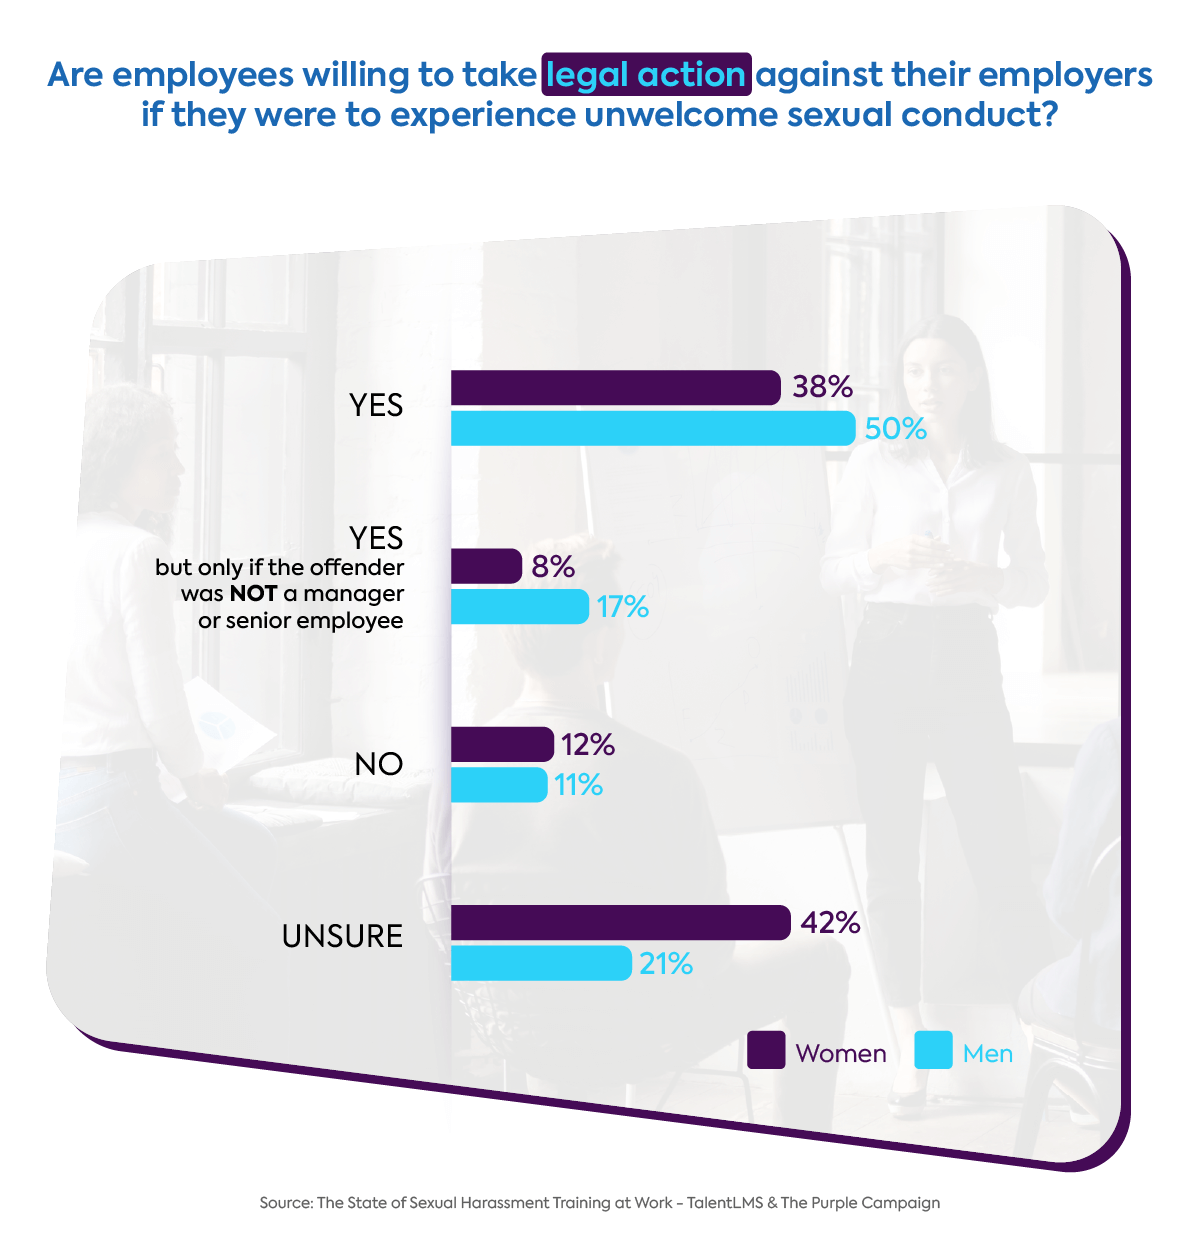 Survey: The state of employee sexual harassment training - would employees take legal action